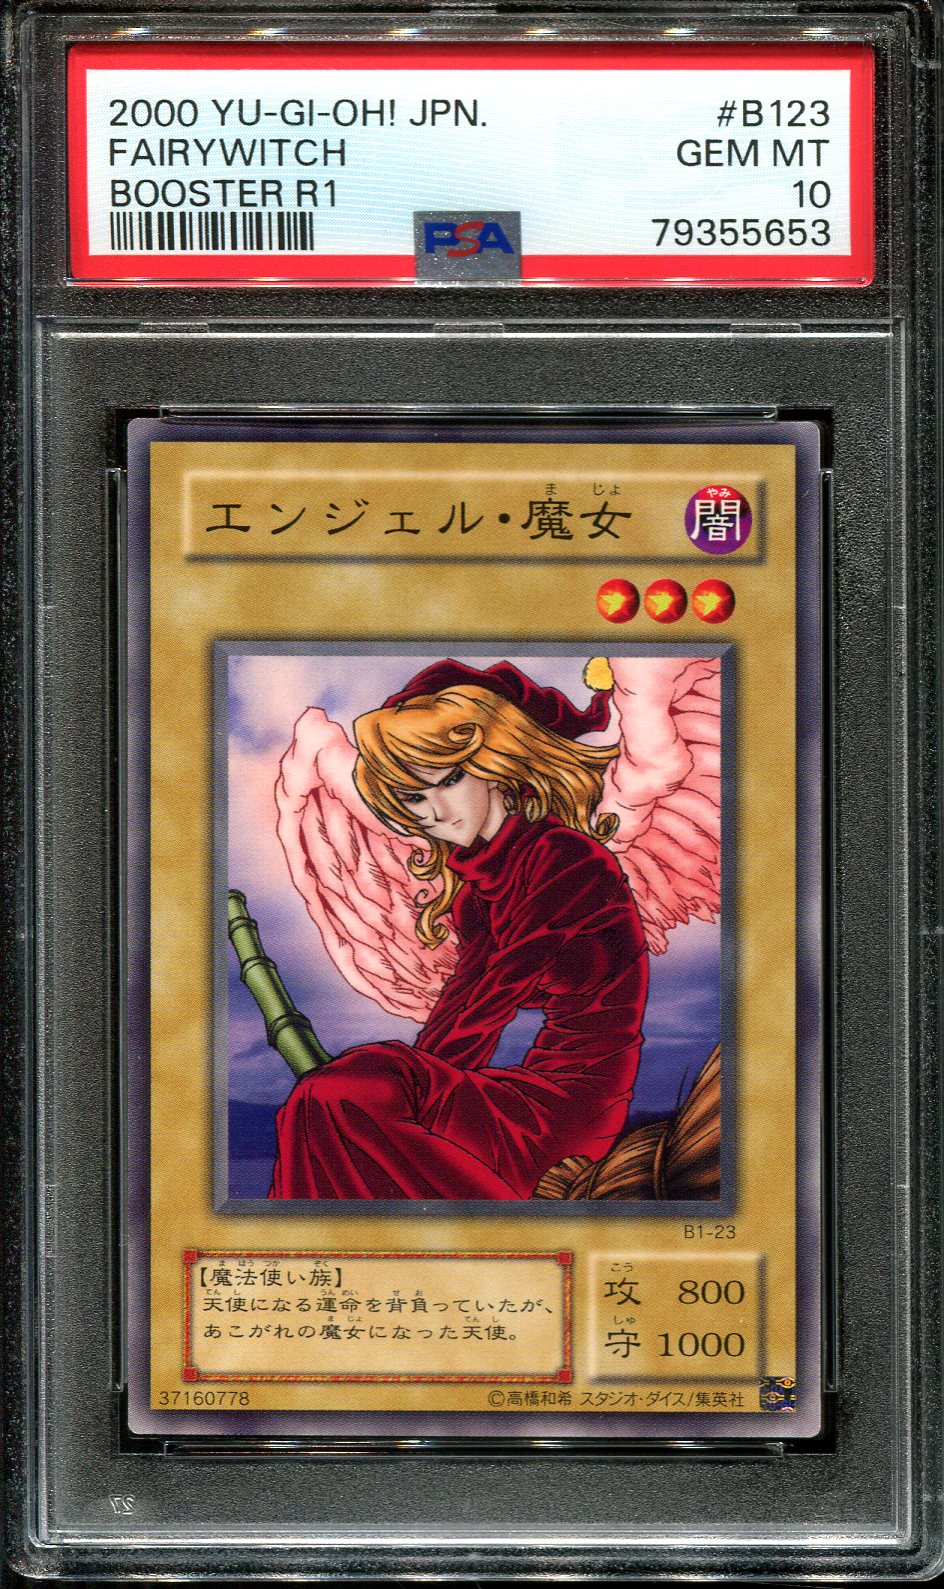 YUGIOH - PSA 10 - FAIRY WITCH - B1-23 - BOOSTER R1 - JAPANESE OCG